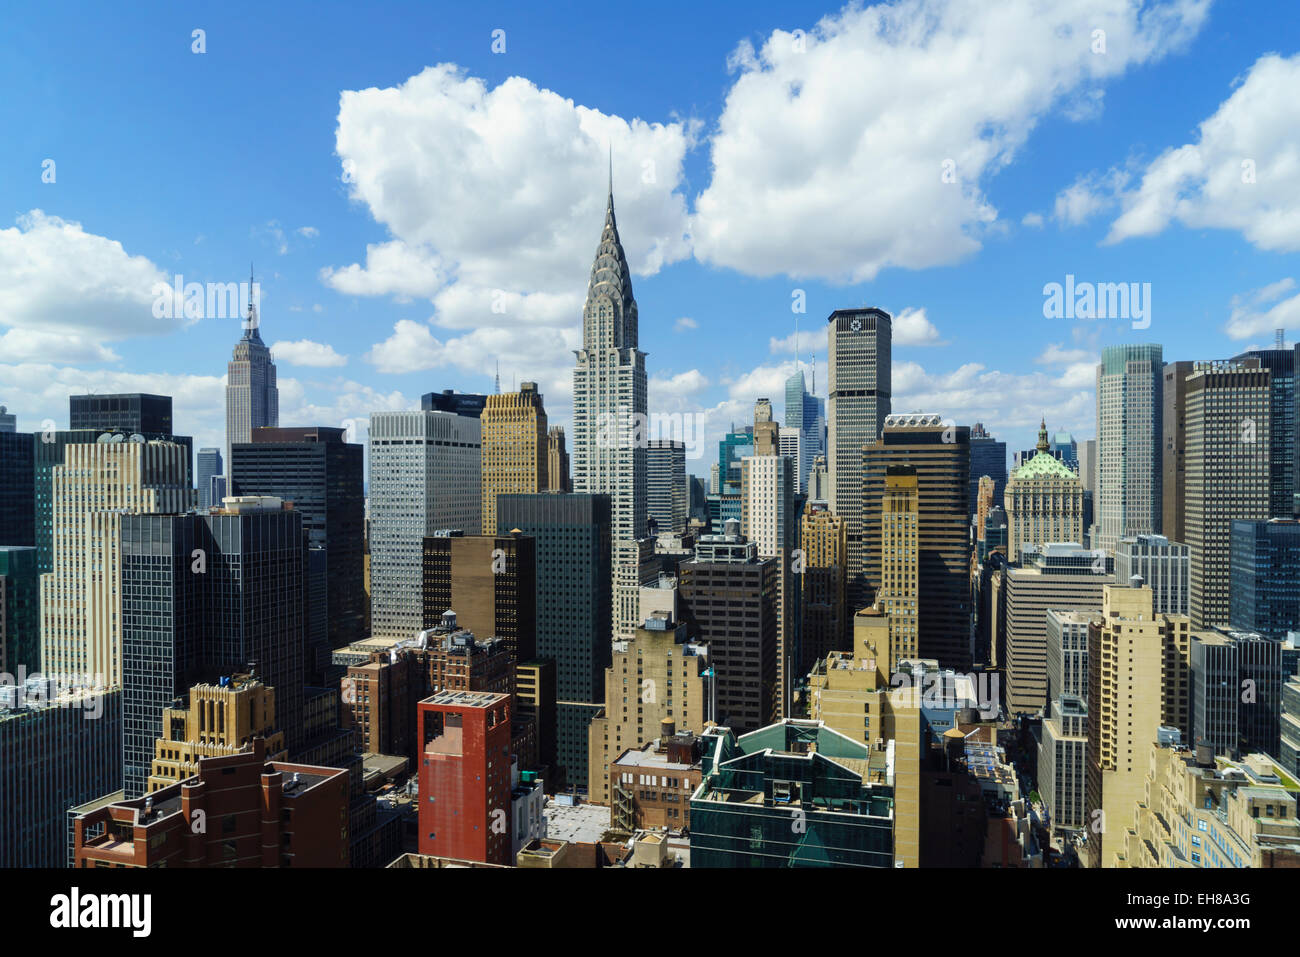 Manhattan skyscrapers inclucing the Empire State Building and Chrysler Building, Manhattan, New York City, New York, USA Stock Photo